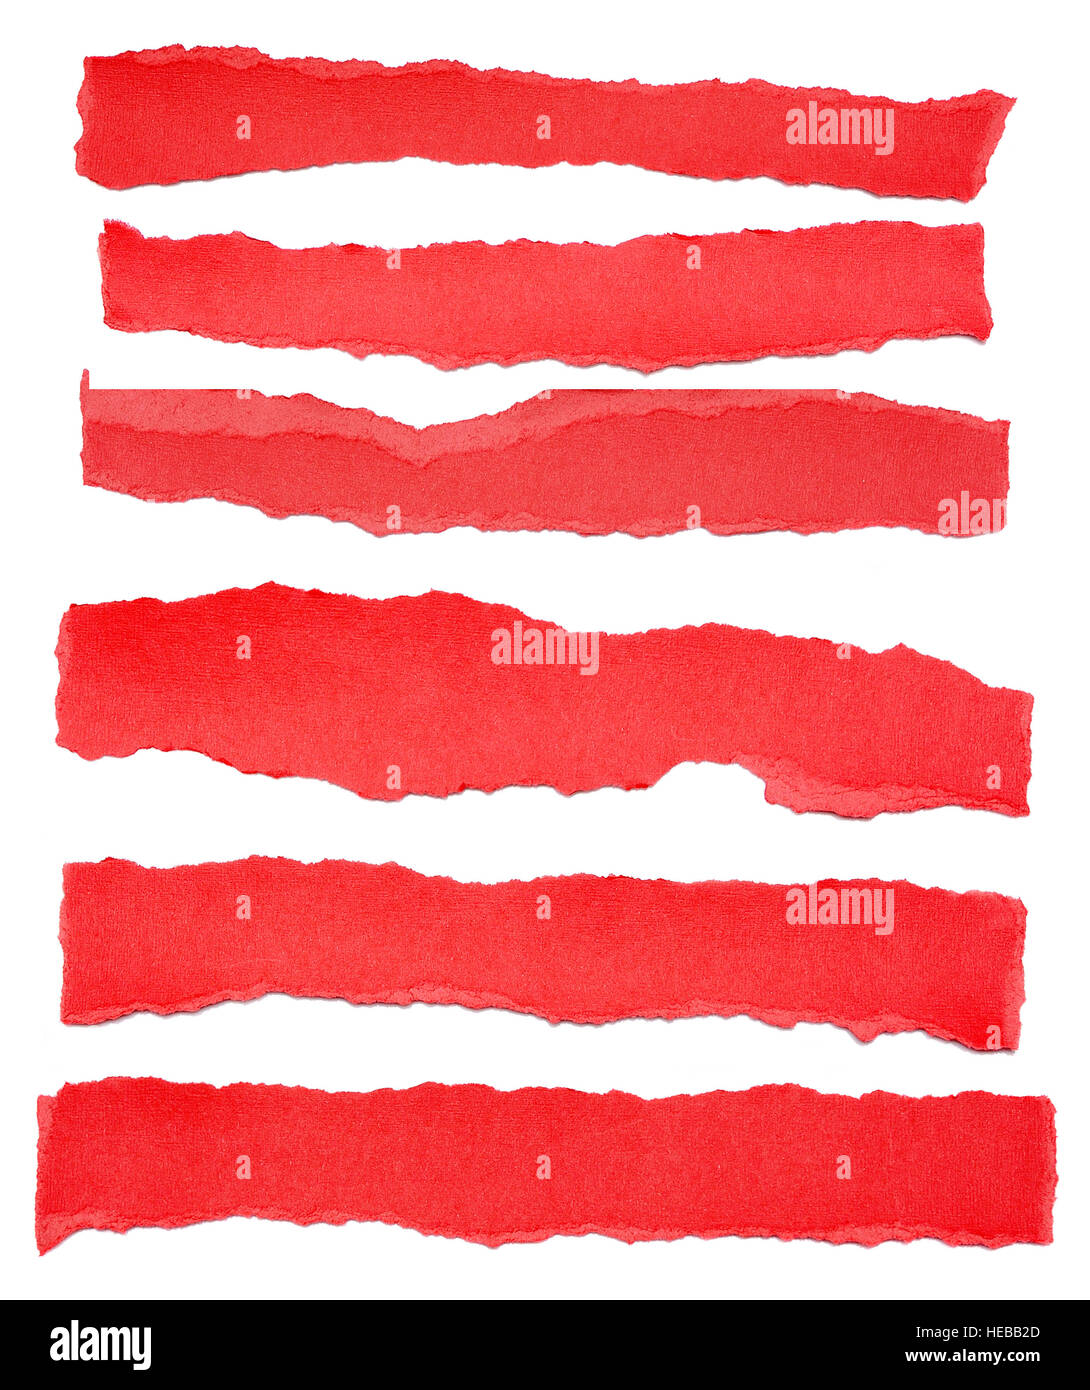 Collection of red paper tears, isolated on white with soft shadows. Stock Photo